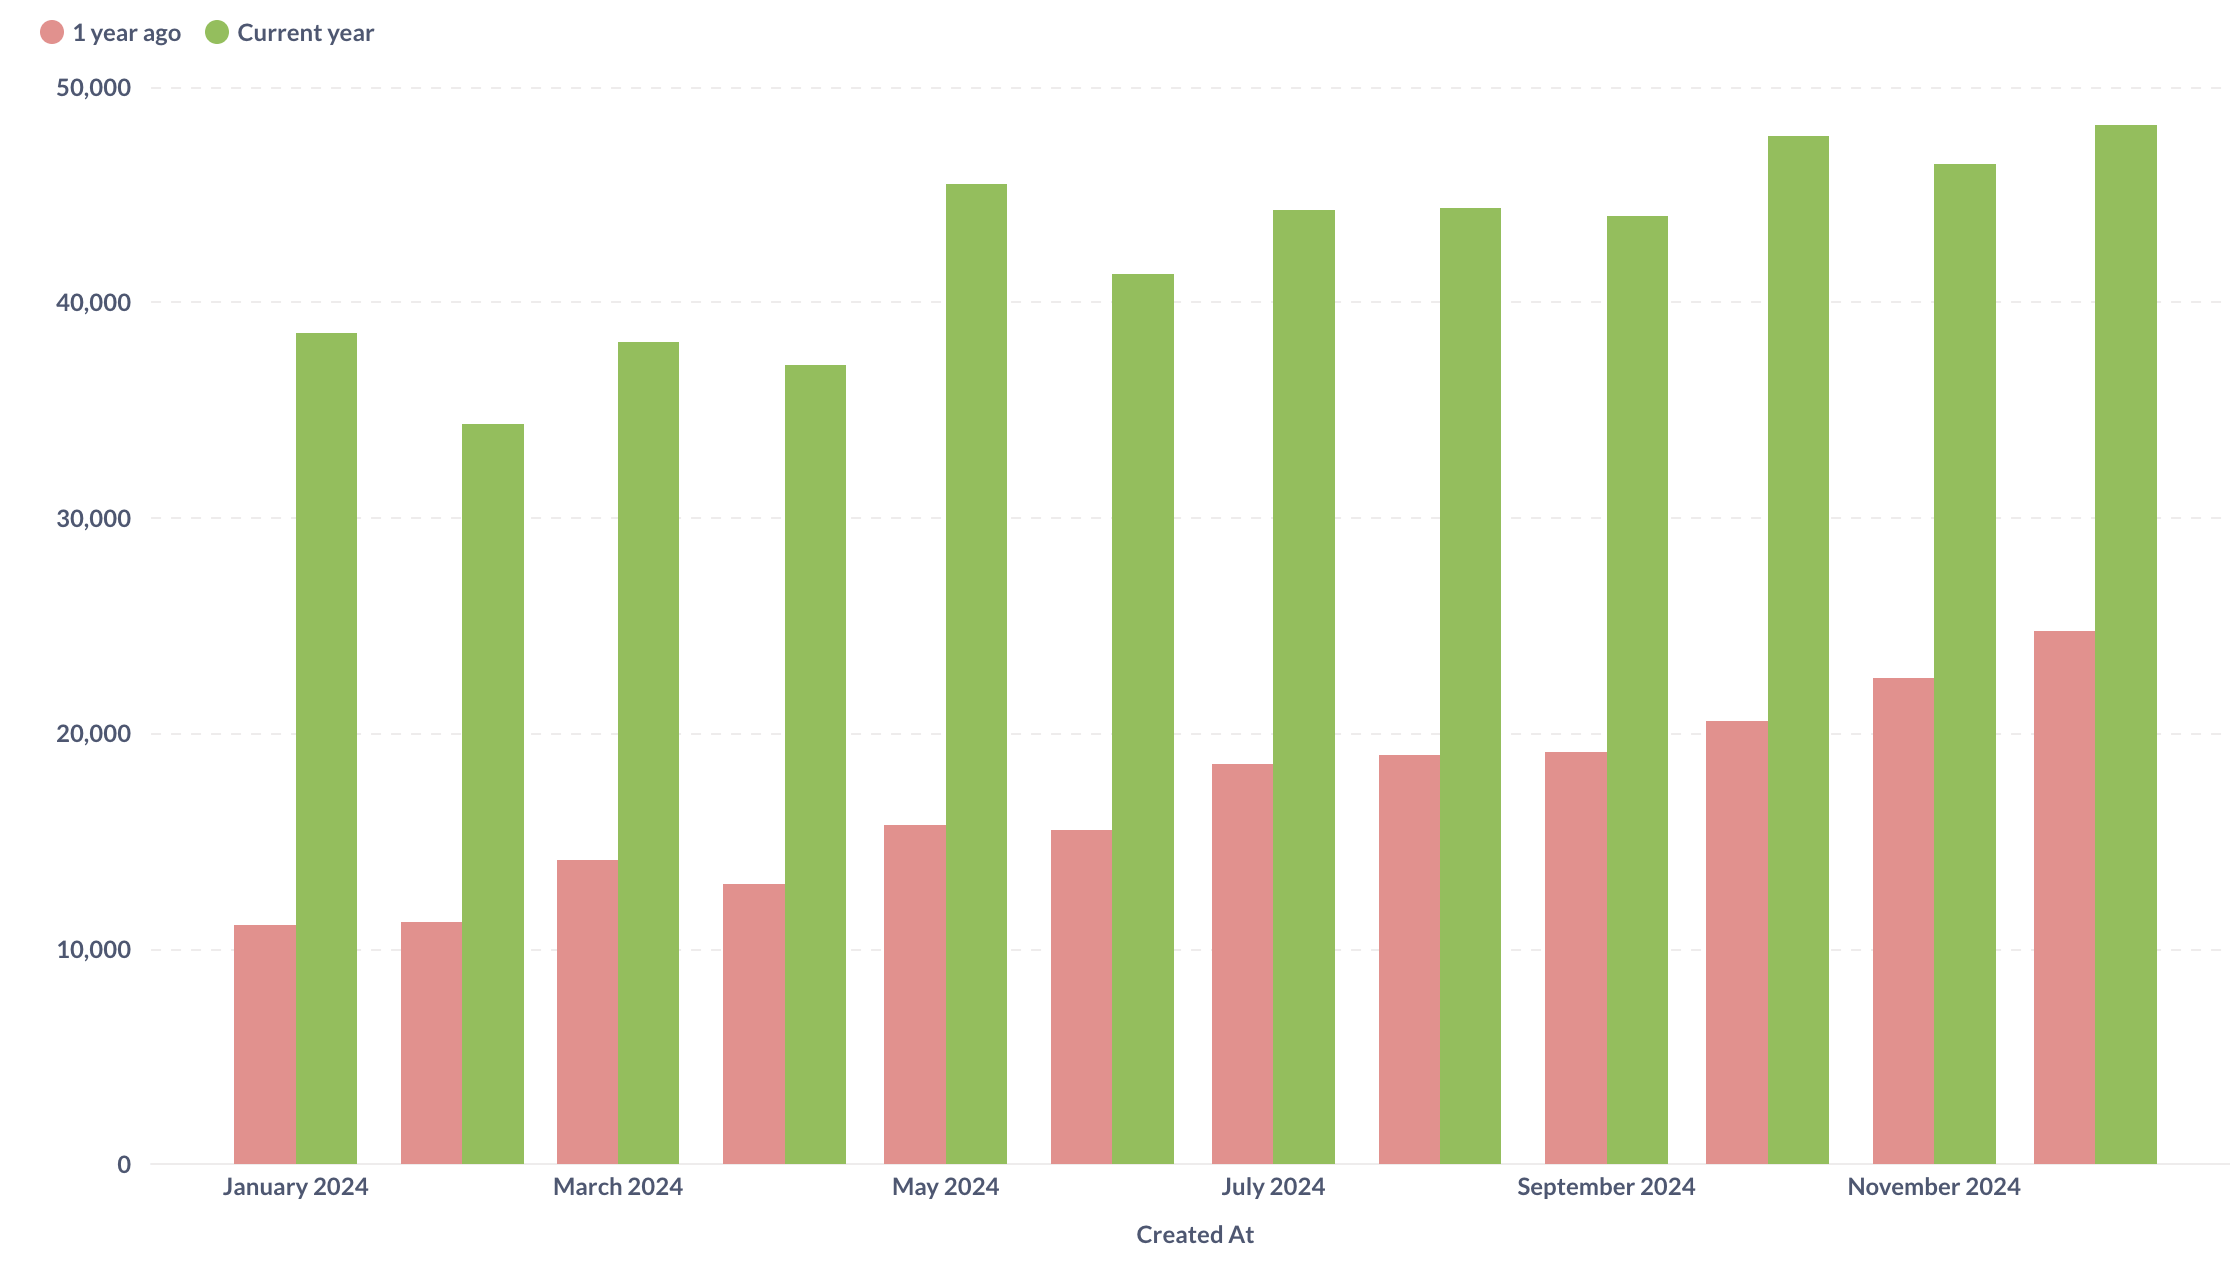 A bar chart grouped by month containing bars for the current and last year